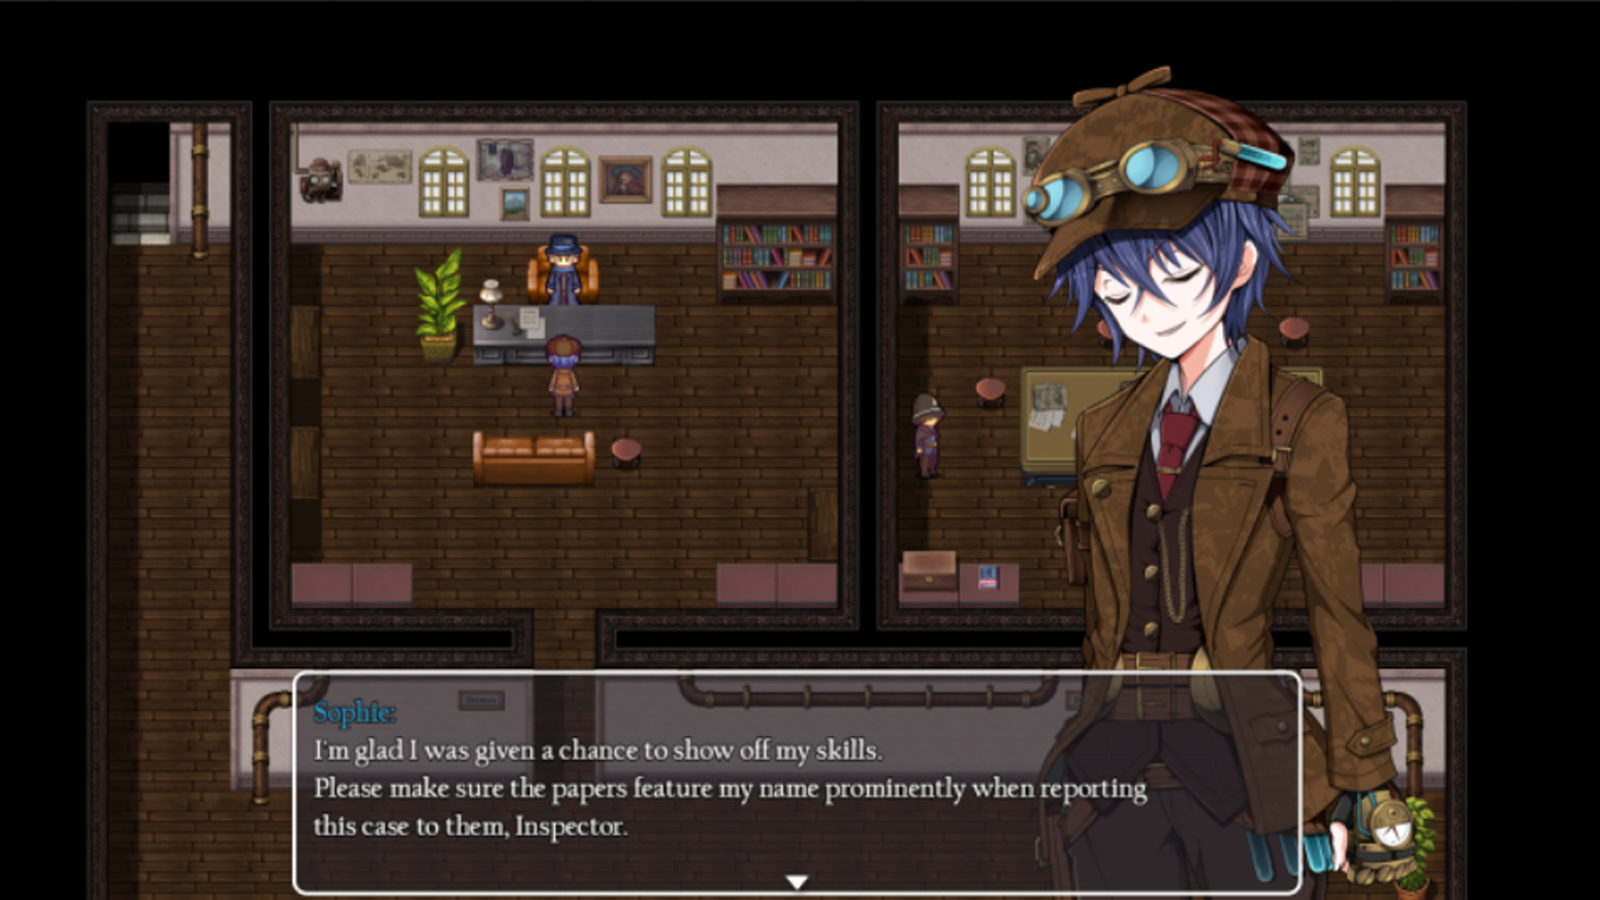 Get feedback from a vast remote working audience about Detective Girl of the Steam City